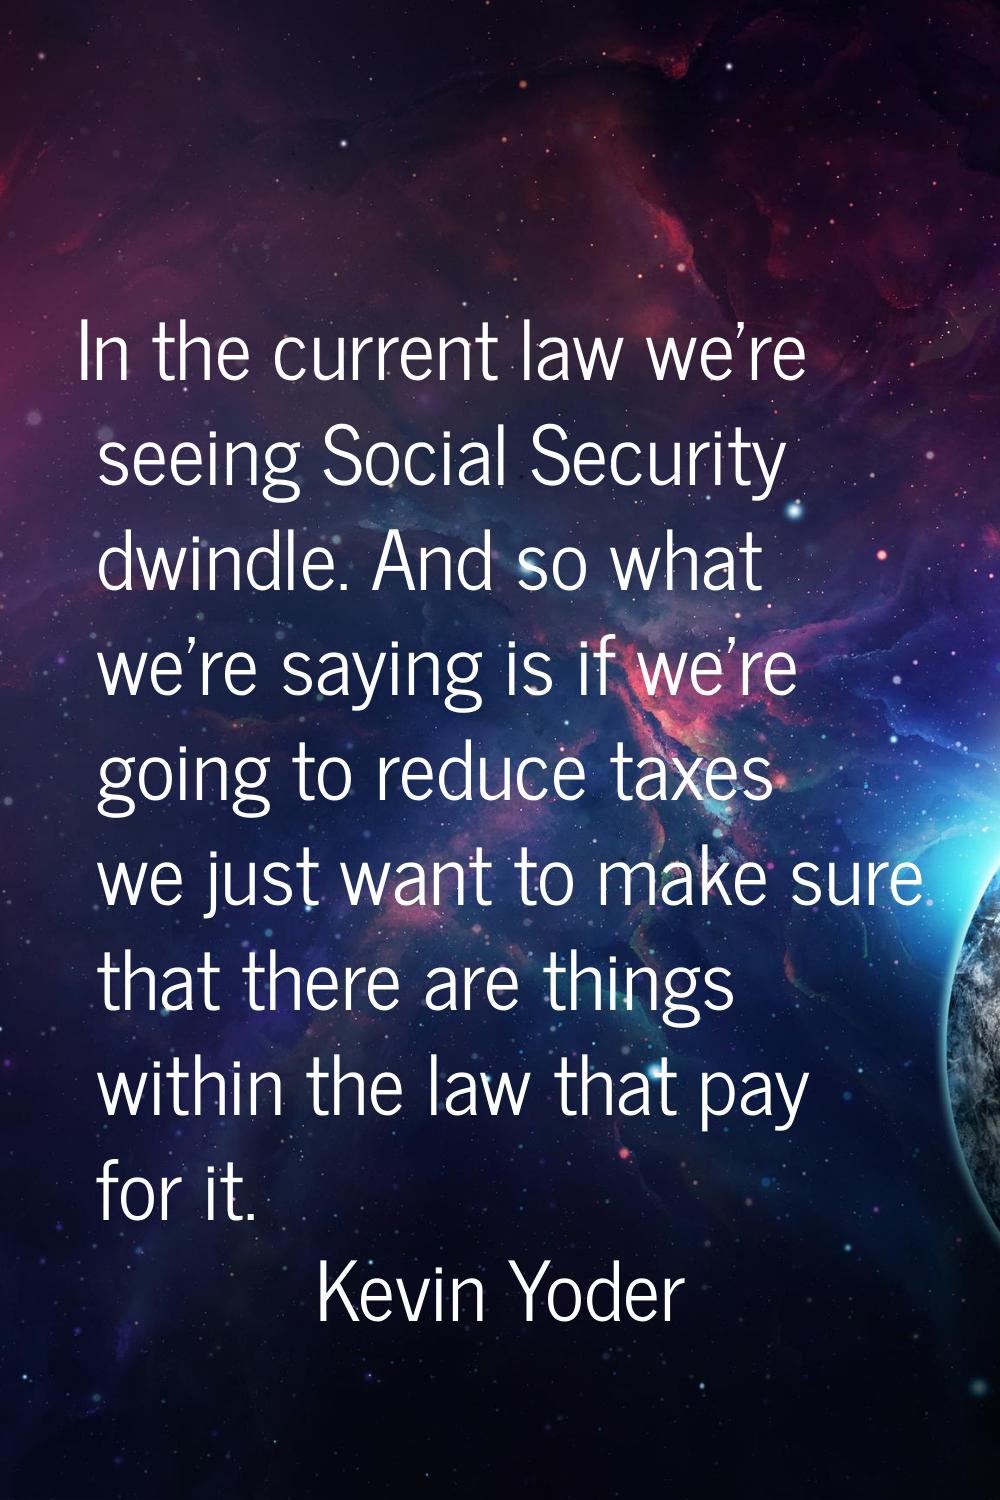 In the current law we're seeing Social Security dwindle. And so what we're saying is if we're going